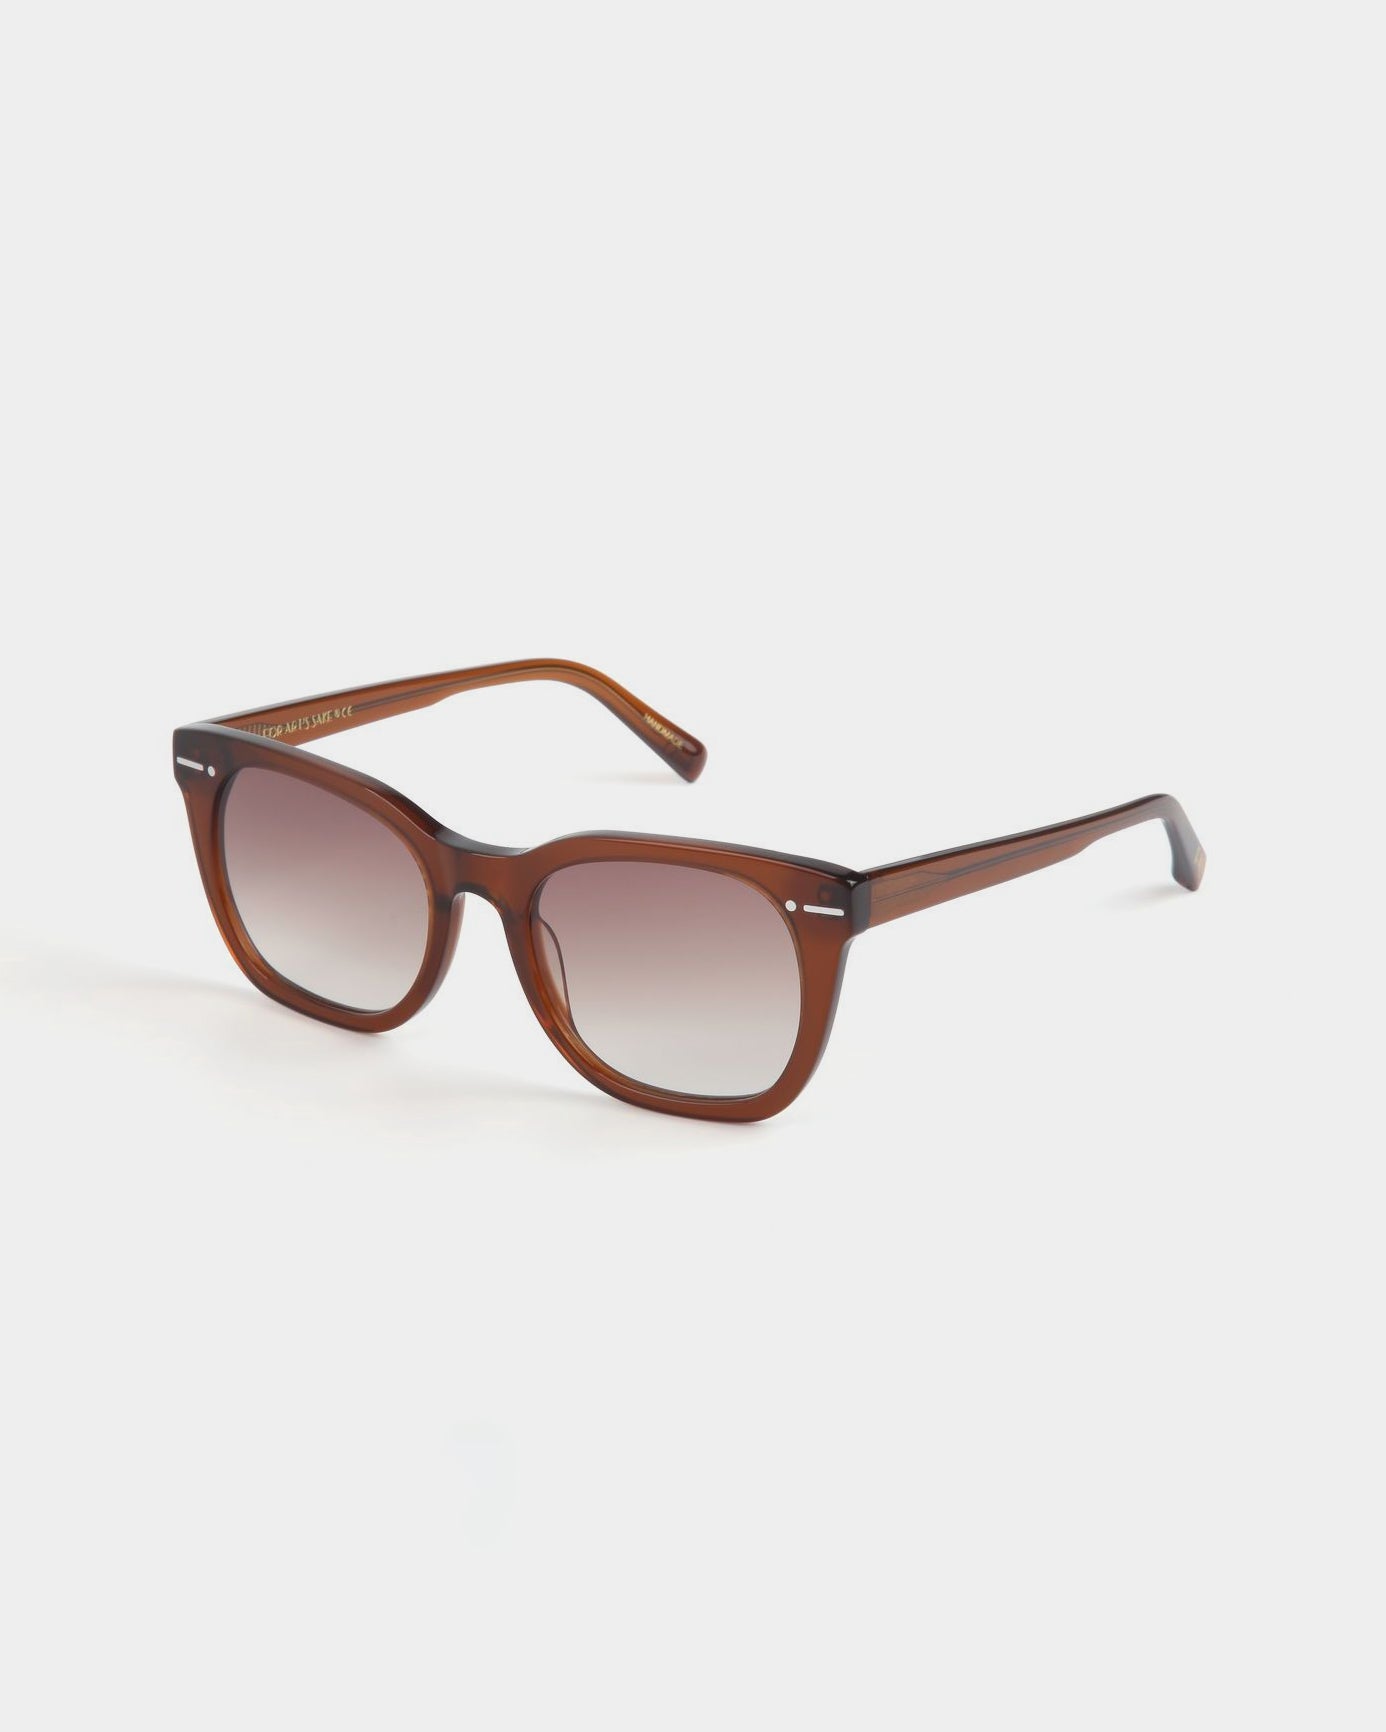 A pair of brown-framed Jacuzzi sunglasses with rectangular nylon lenses, transitioning from a solid brown tint at the top to a lighter shade at the bottom. The design is stylish and modern, featuring slightly curved arms and a glossy finish, while offering full UVA &amp; UVB protection. The brand behind this model is For Art&#39;s Sake®.